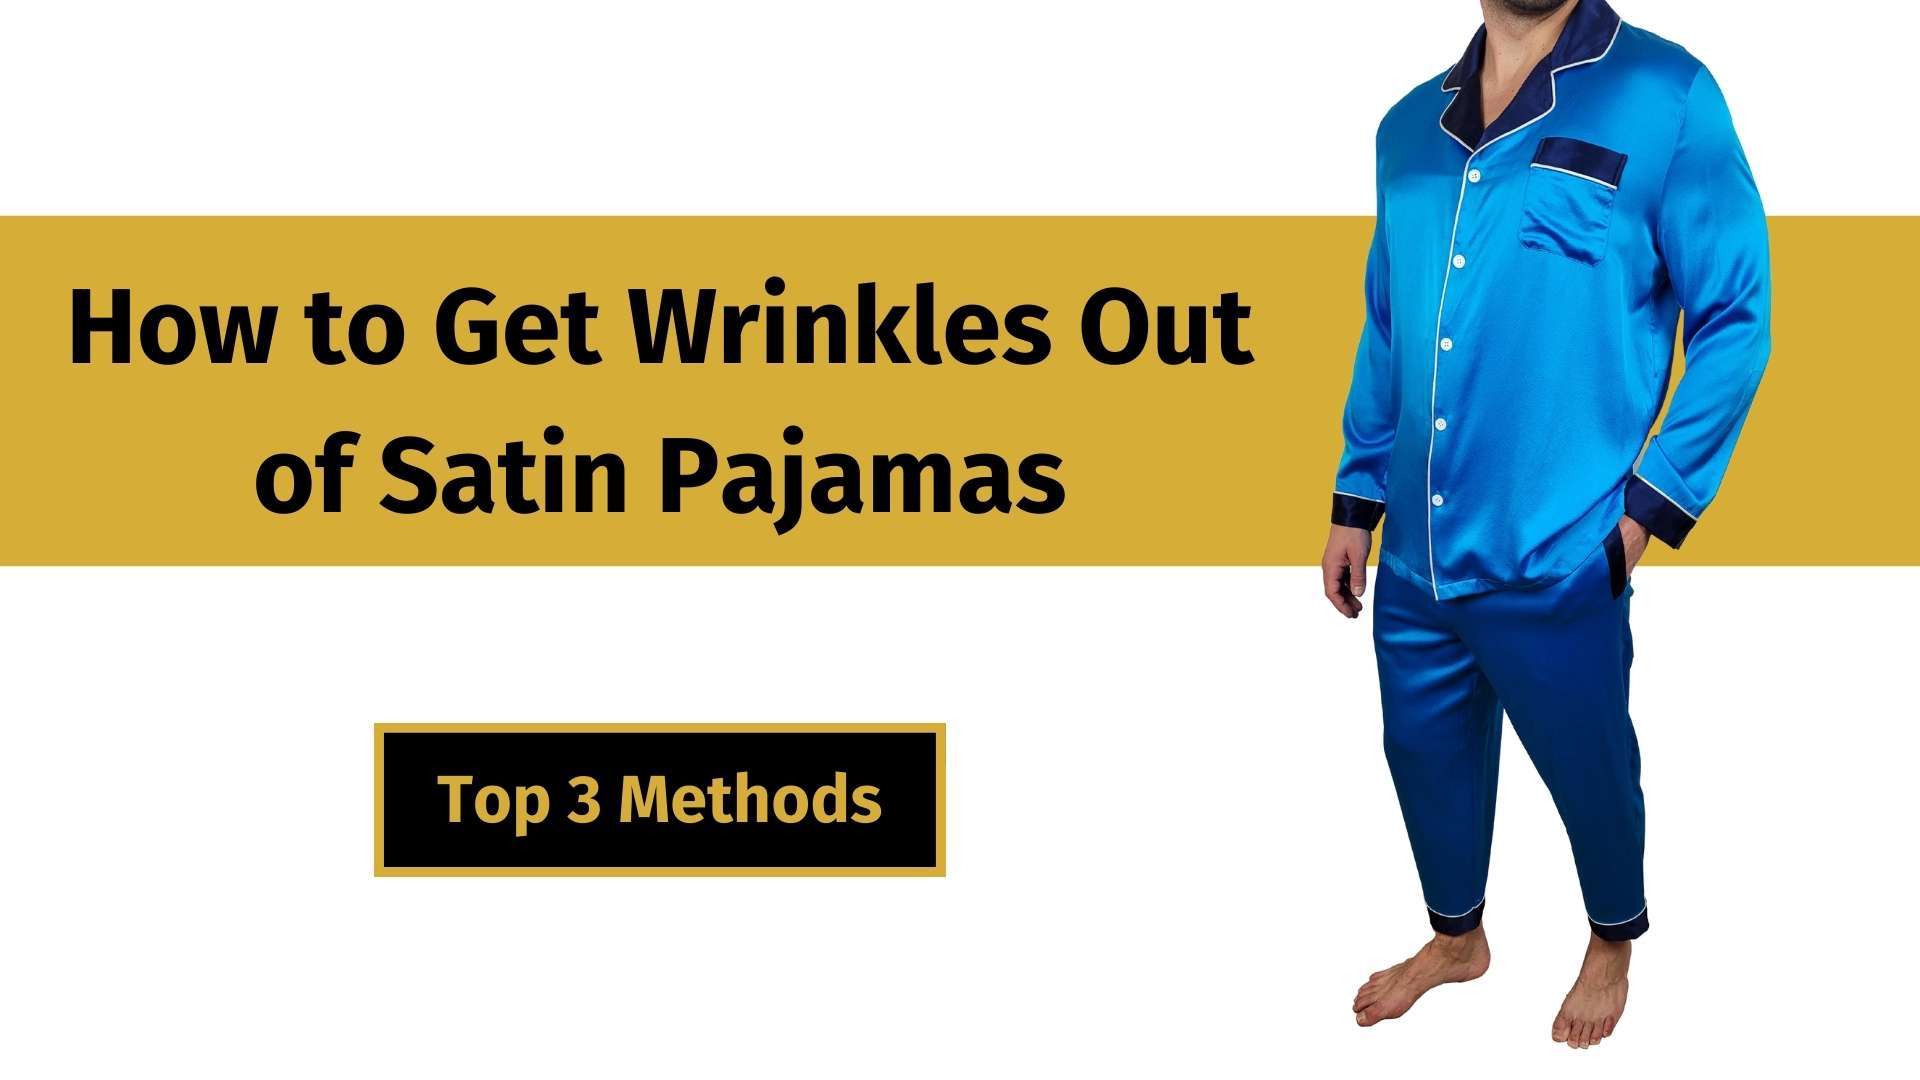 how to get wrinkles out of satin pajamas banner image with a man wearing a pair of blue satin pajamas